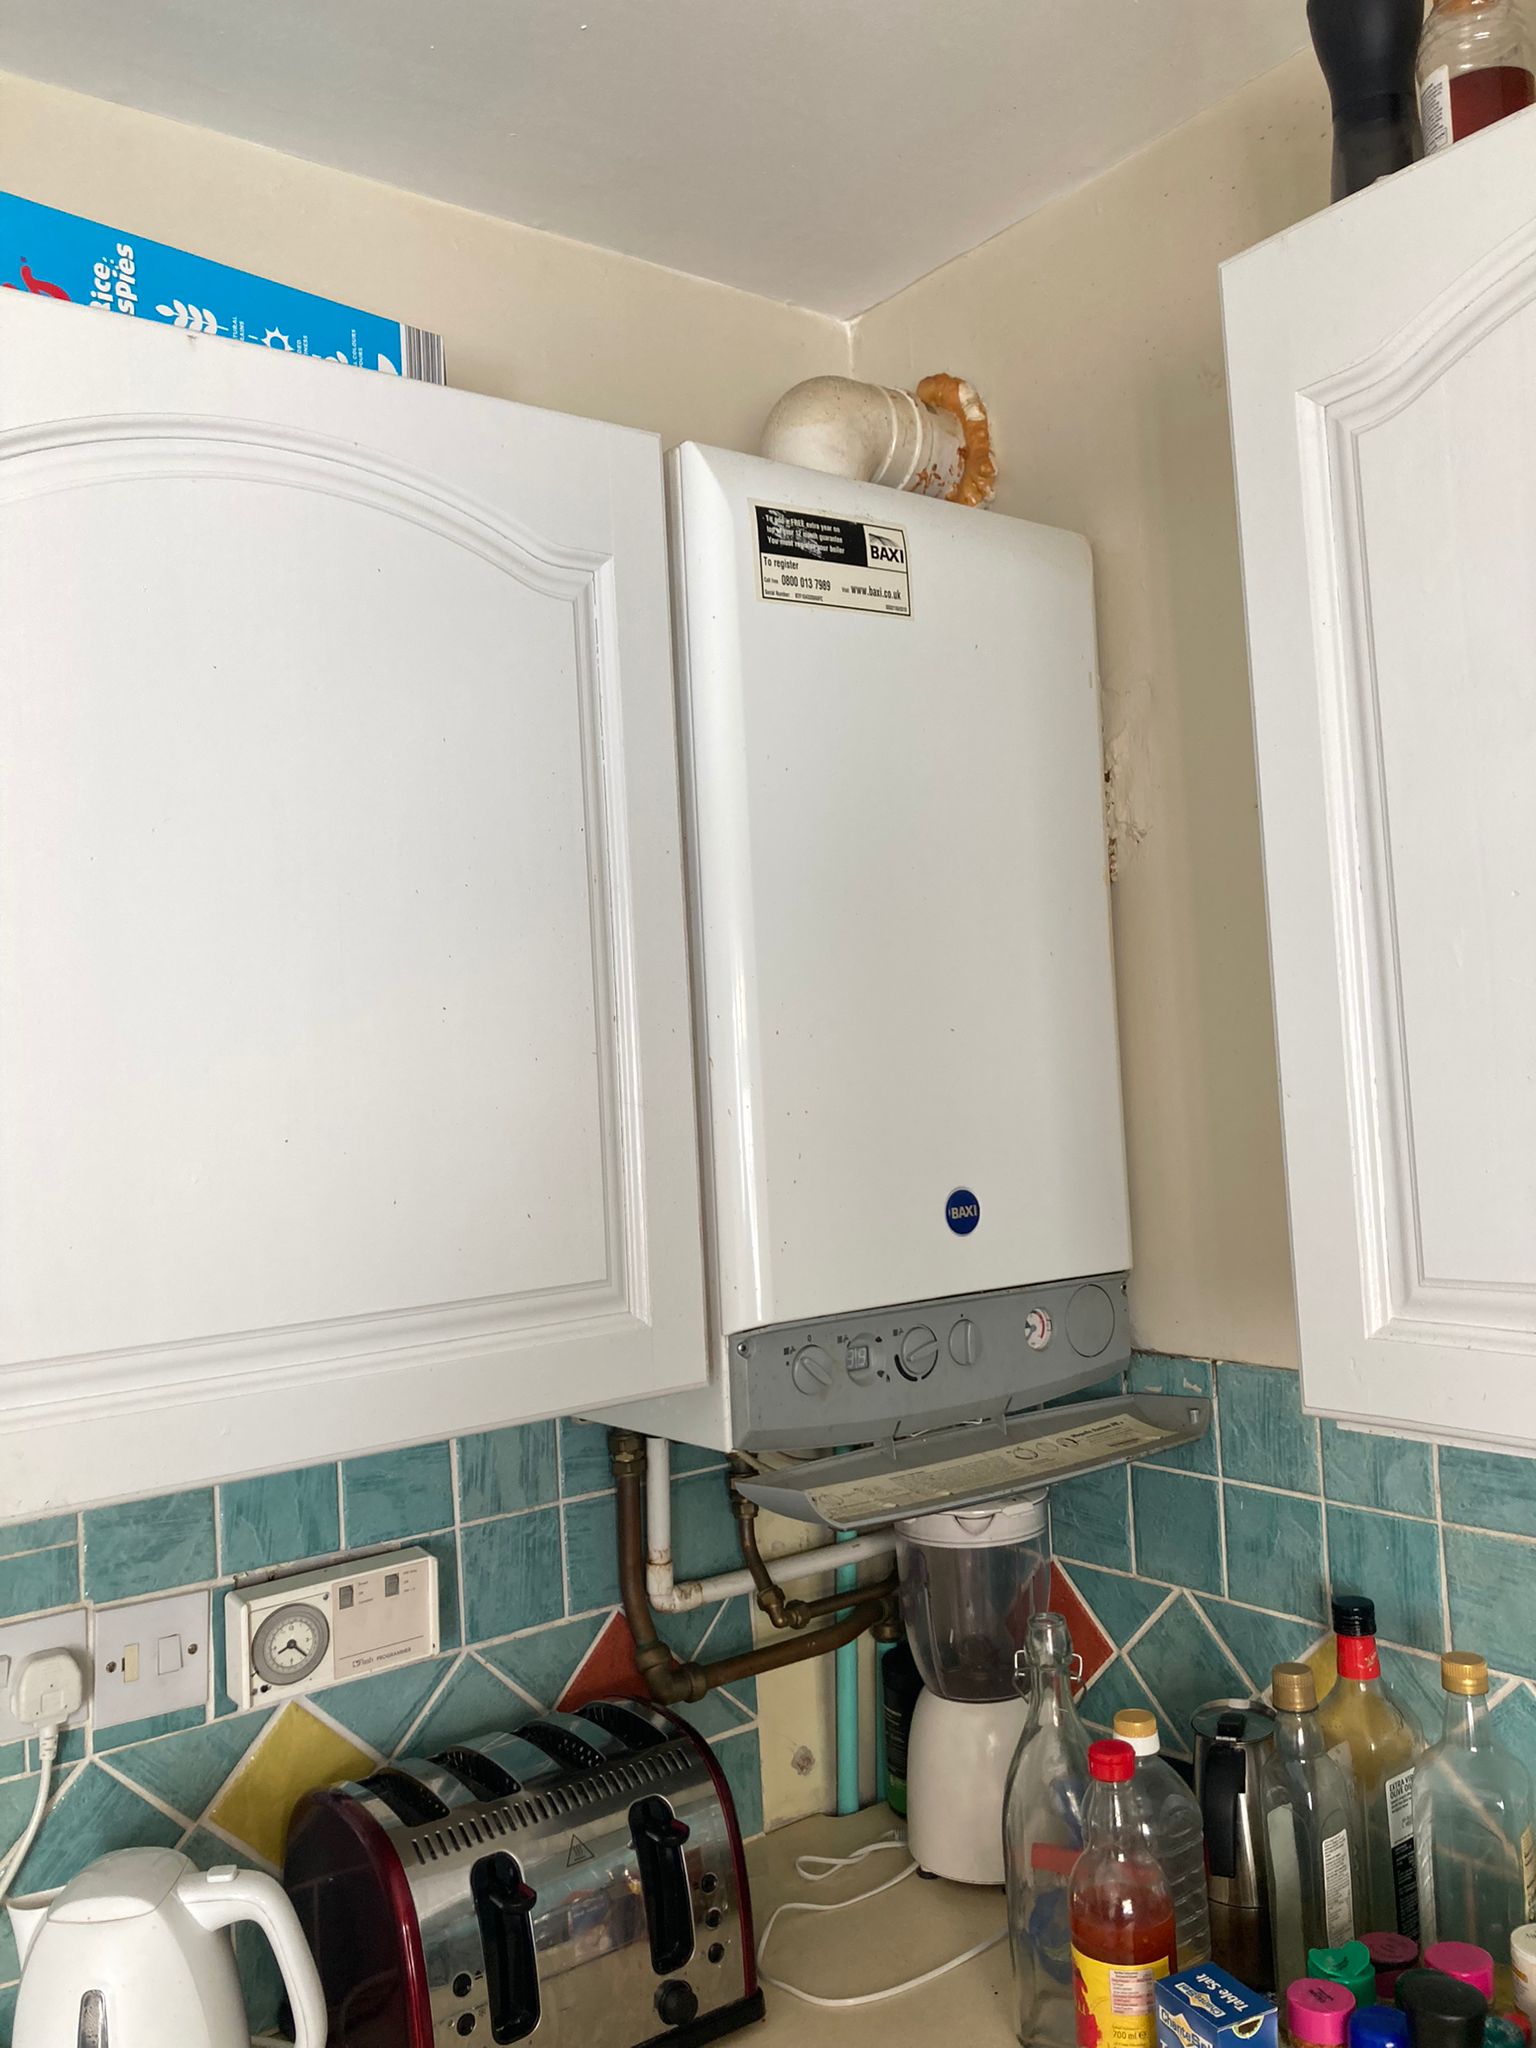 Replaceing an old Baxi Boiler with an Ideal Logic Boiler